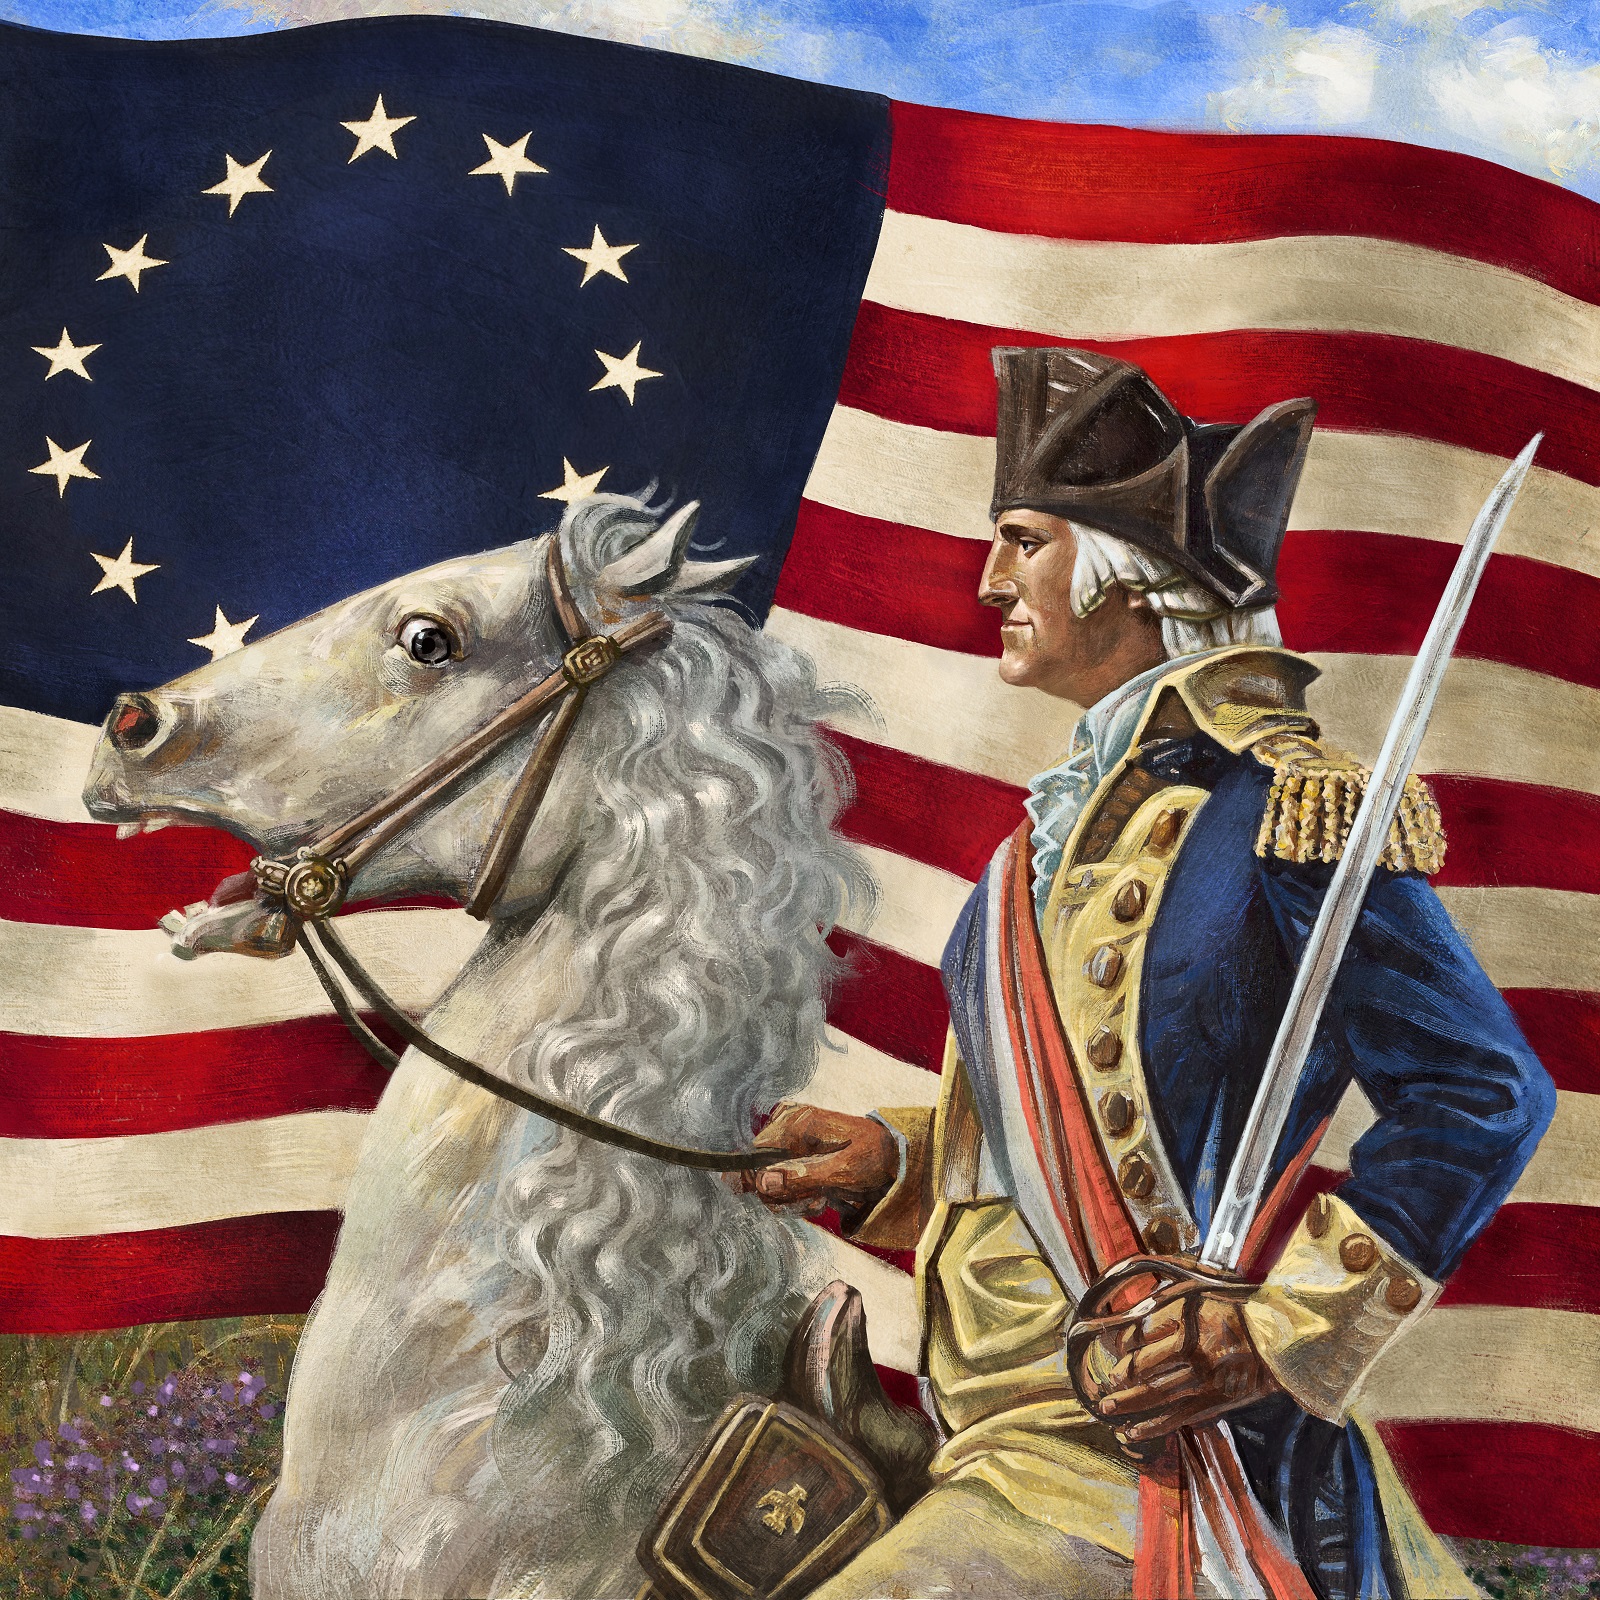 George Washington with the Betsy Ross Flag, by Daniel Evon @ ArtChateau.com